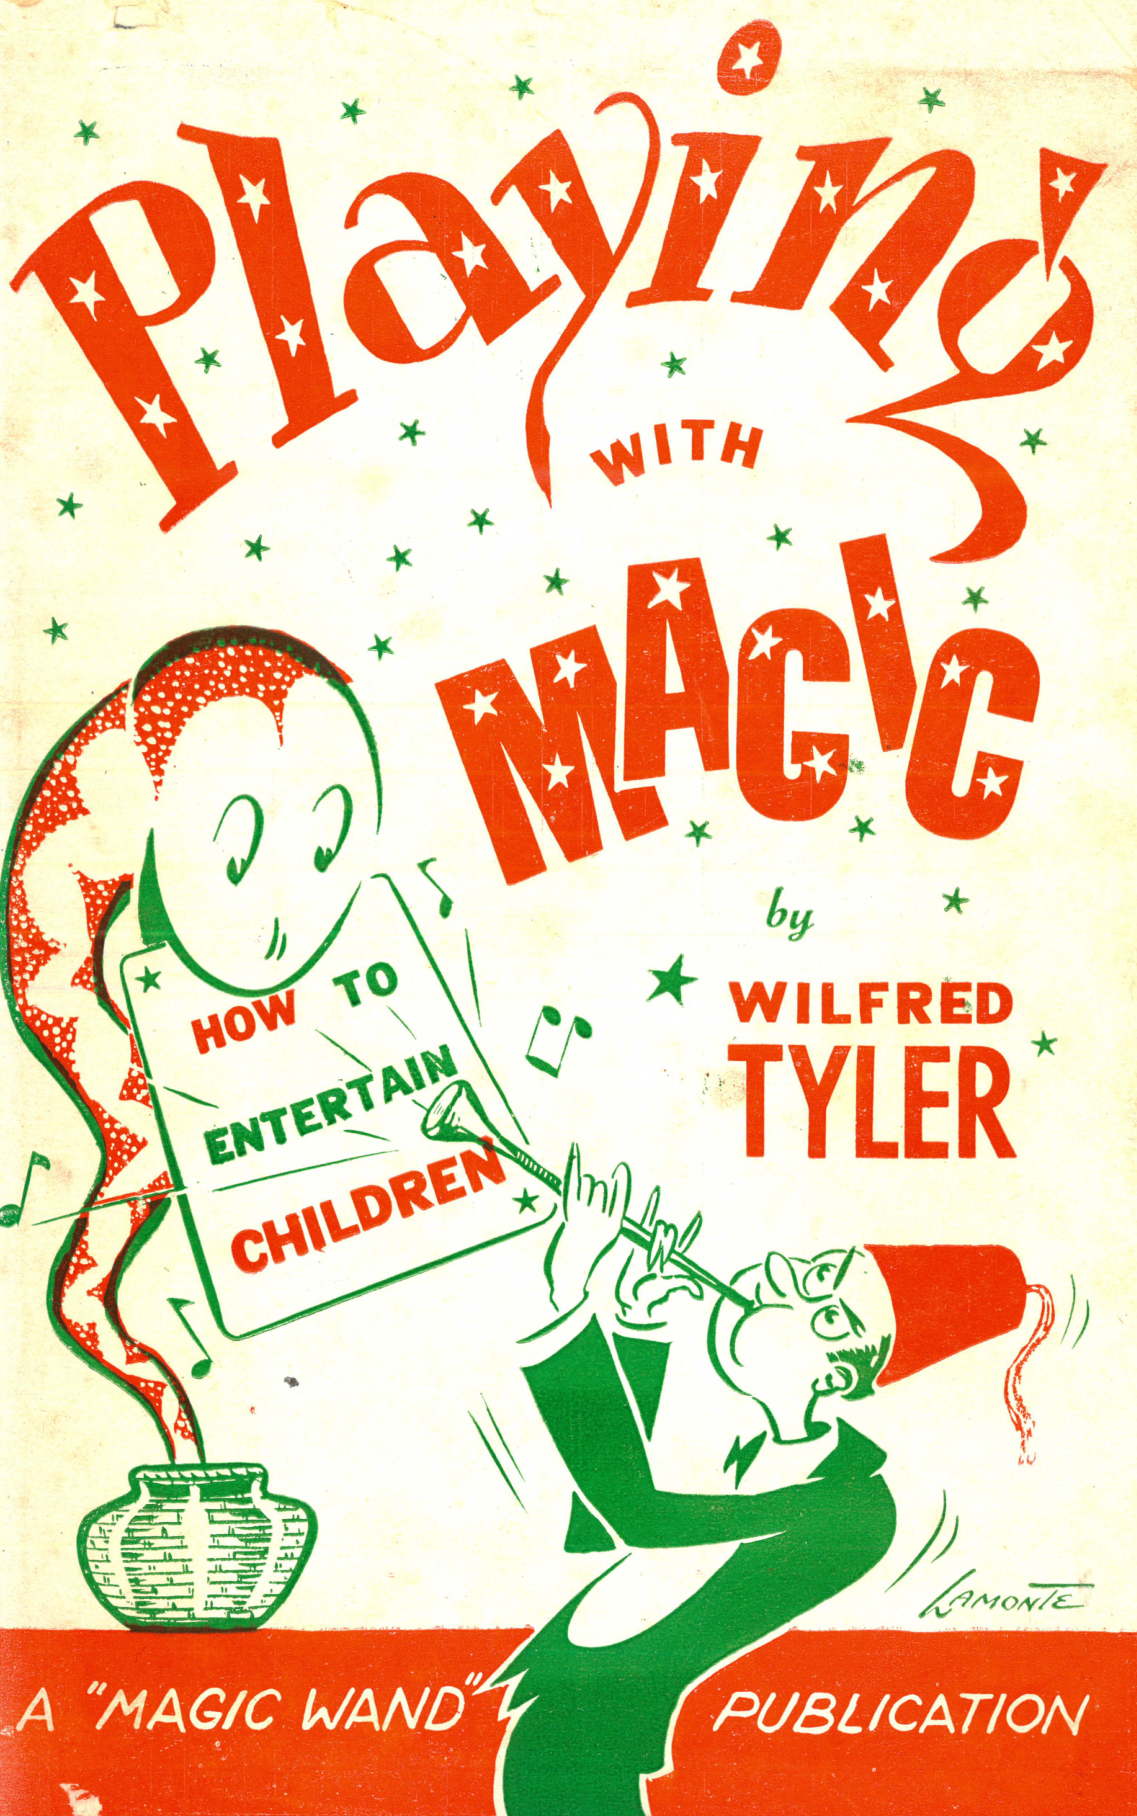 Wilfred Tyler - Playing With Magic (1953)